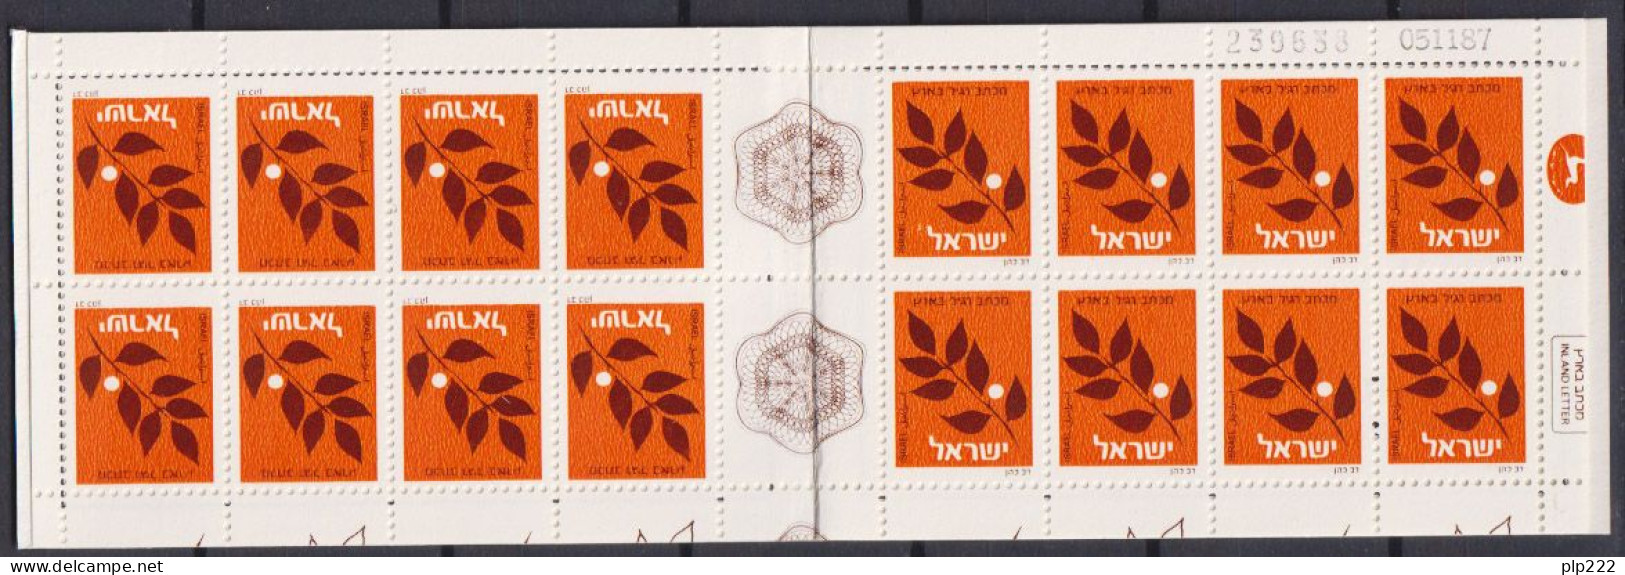 Israele 1988 Libretto / Booklet C1054 **/MNH VF - Booklets